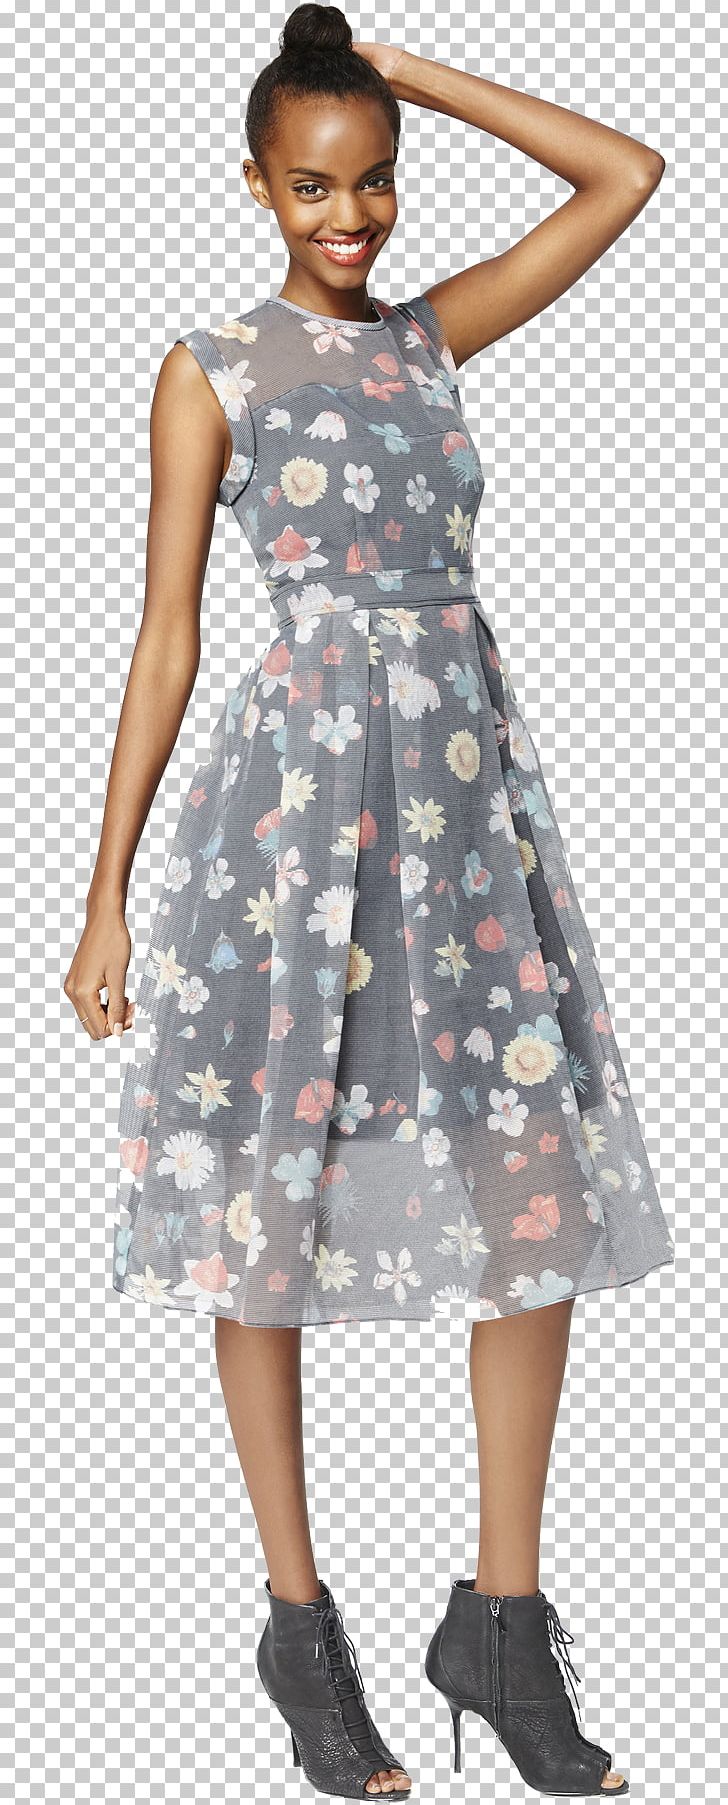 Fashion Skirt Dress Sleeve Pattern PNG, Clipart, Clothing, Day Dress, Dress, Fashion, Fashion Model Free PNG Download